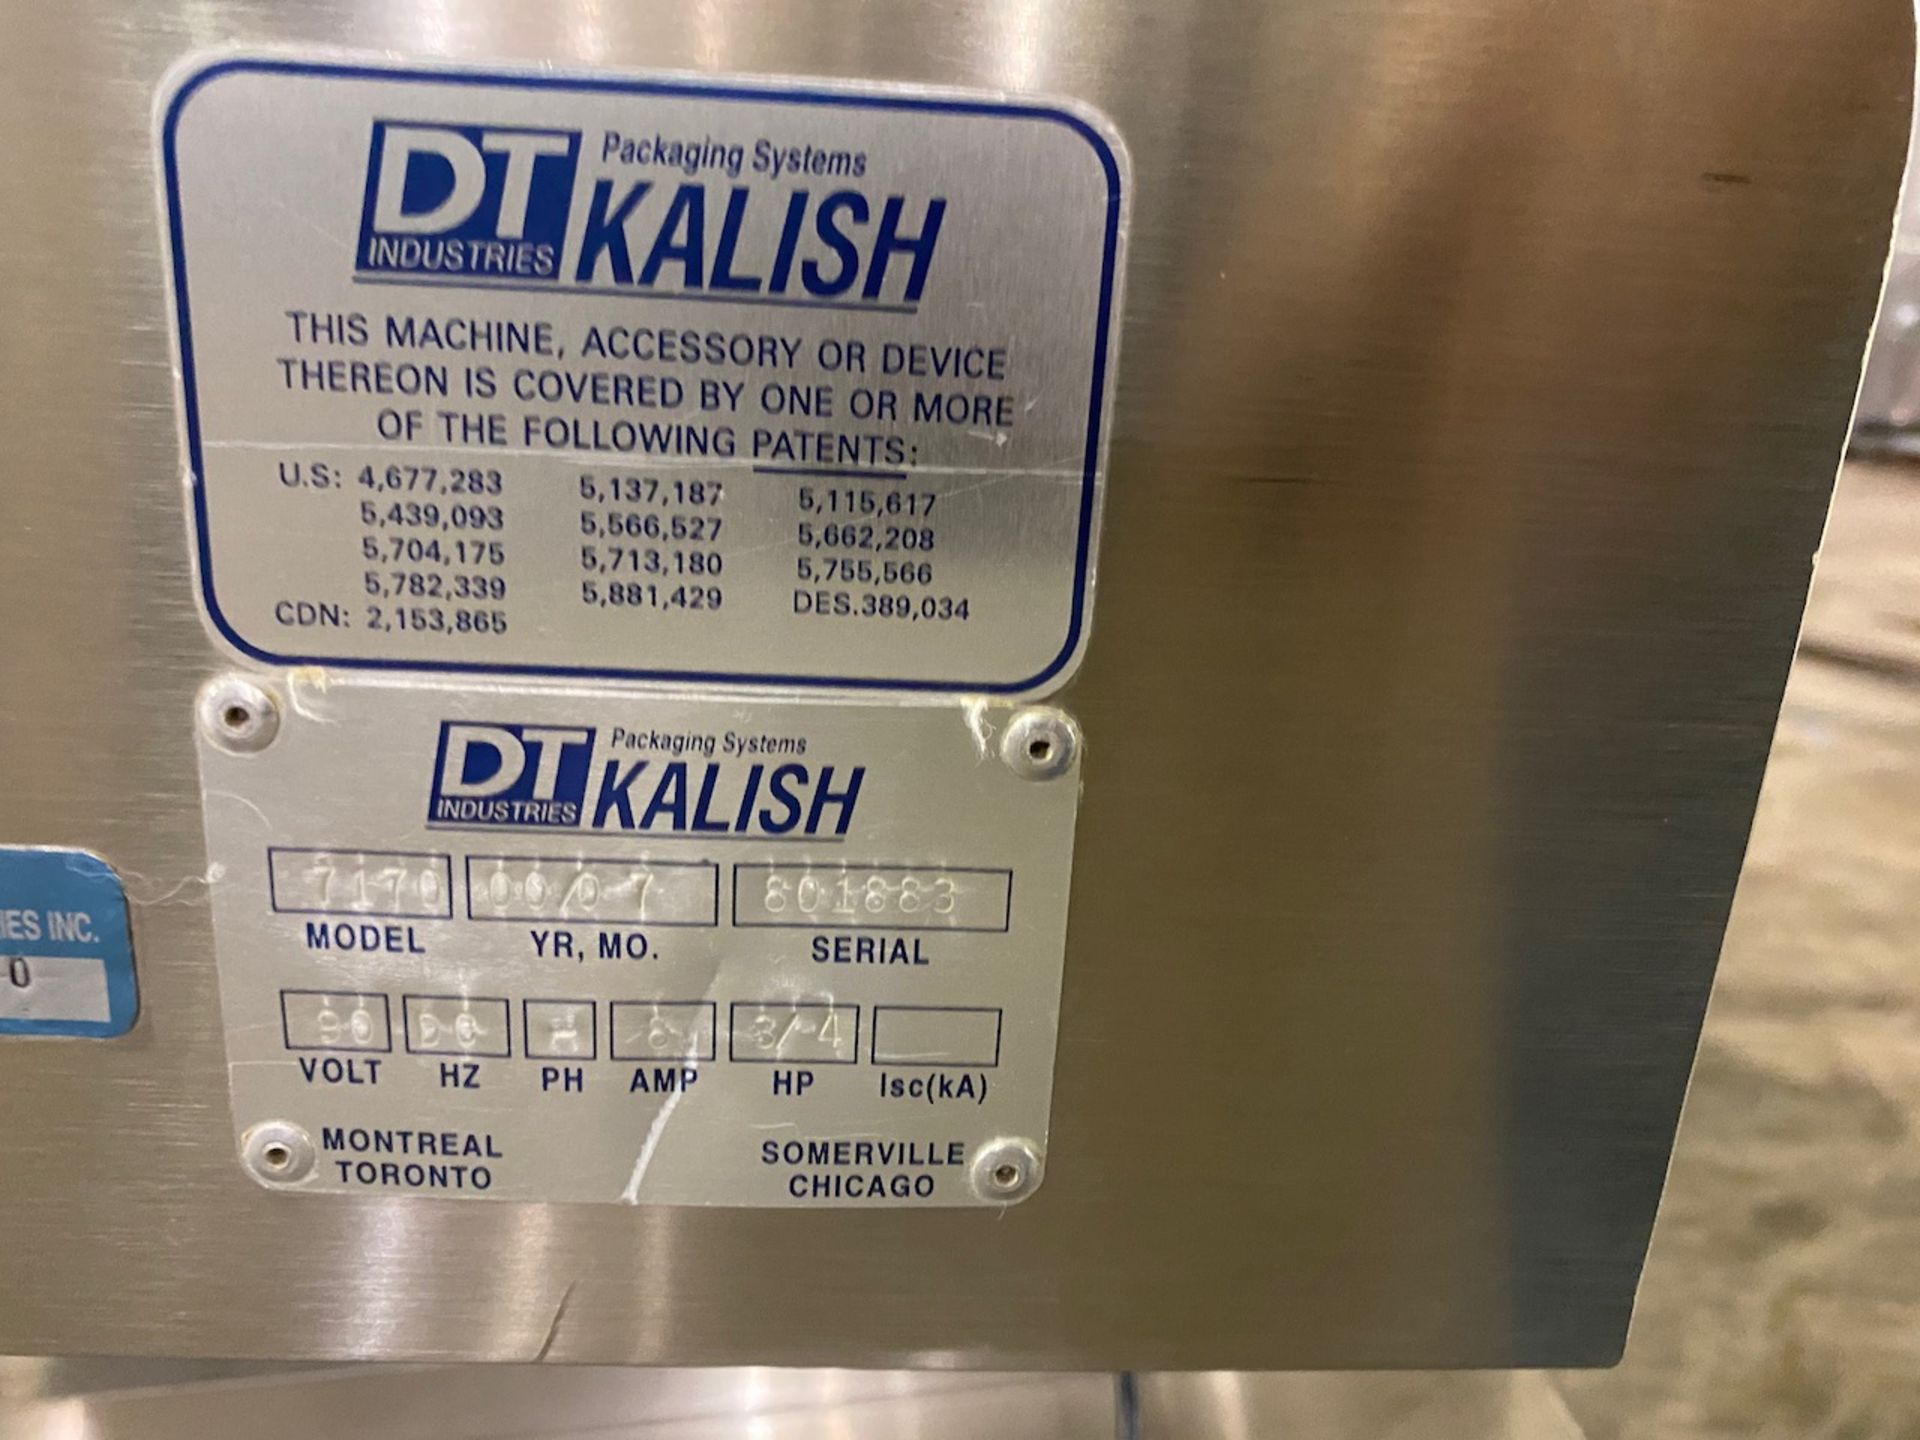 DT Industries Kalish Model 8065 (SwiftPack Automation Model B12P3PTS) 12-Lane Dual Head Inline - Image 16 of 23